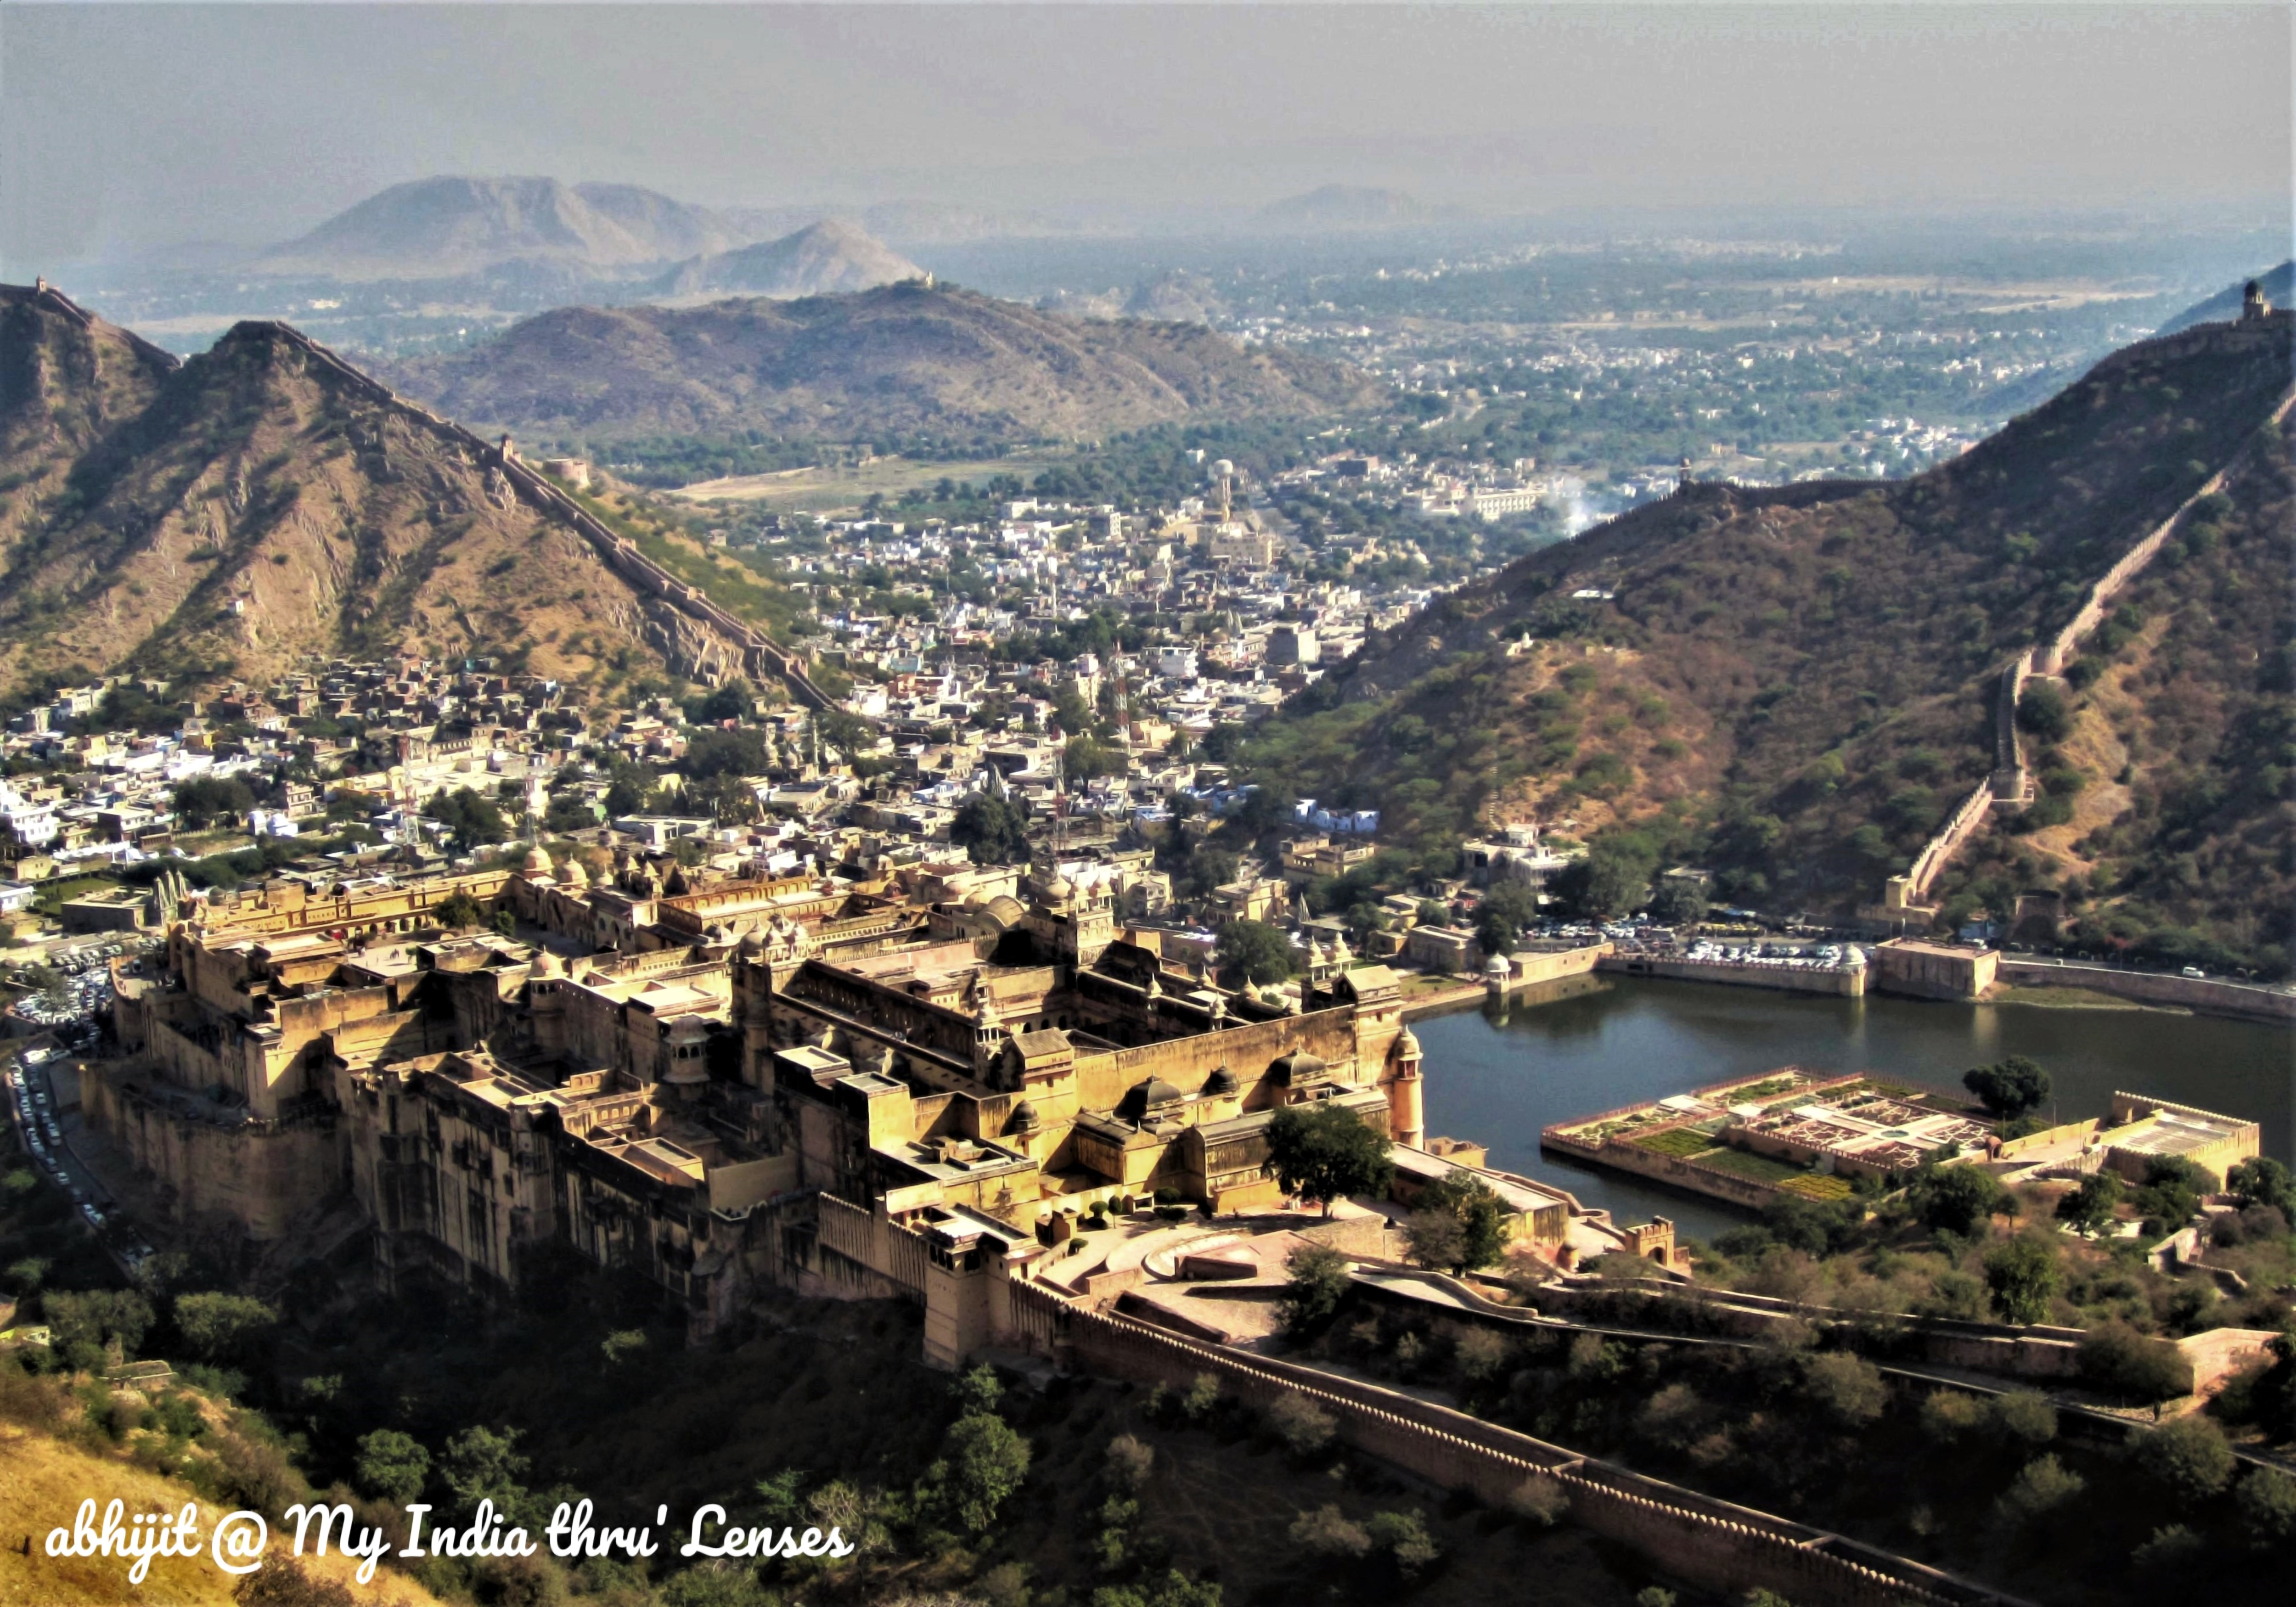 View of Amber Fort & Maota Lake from the top of Jaigarh Fort